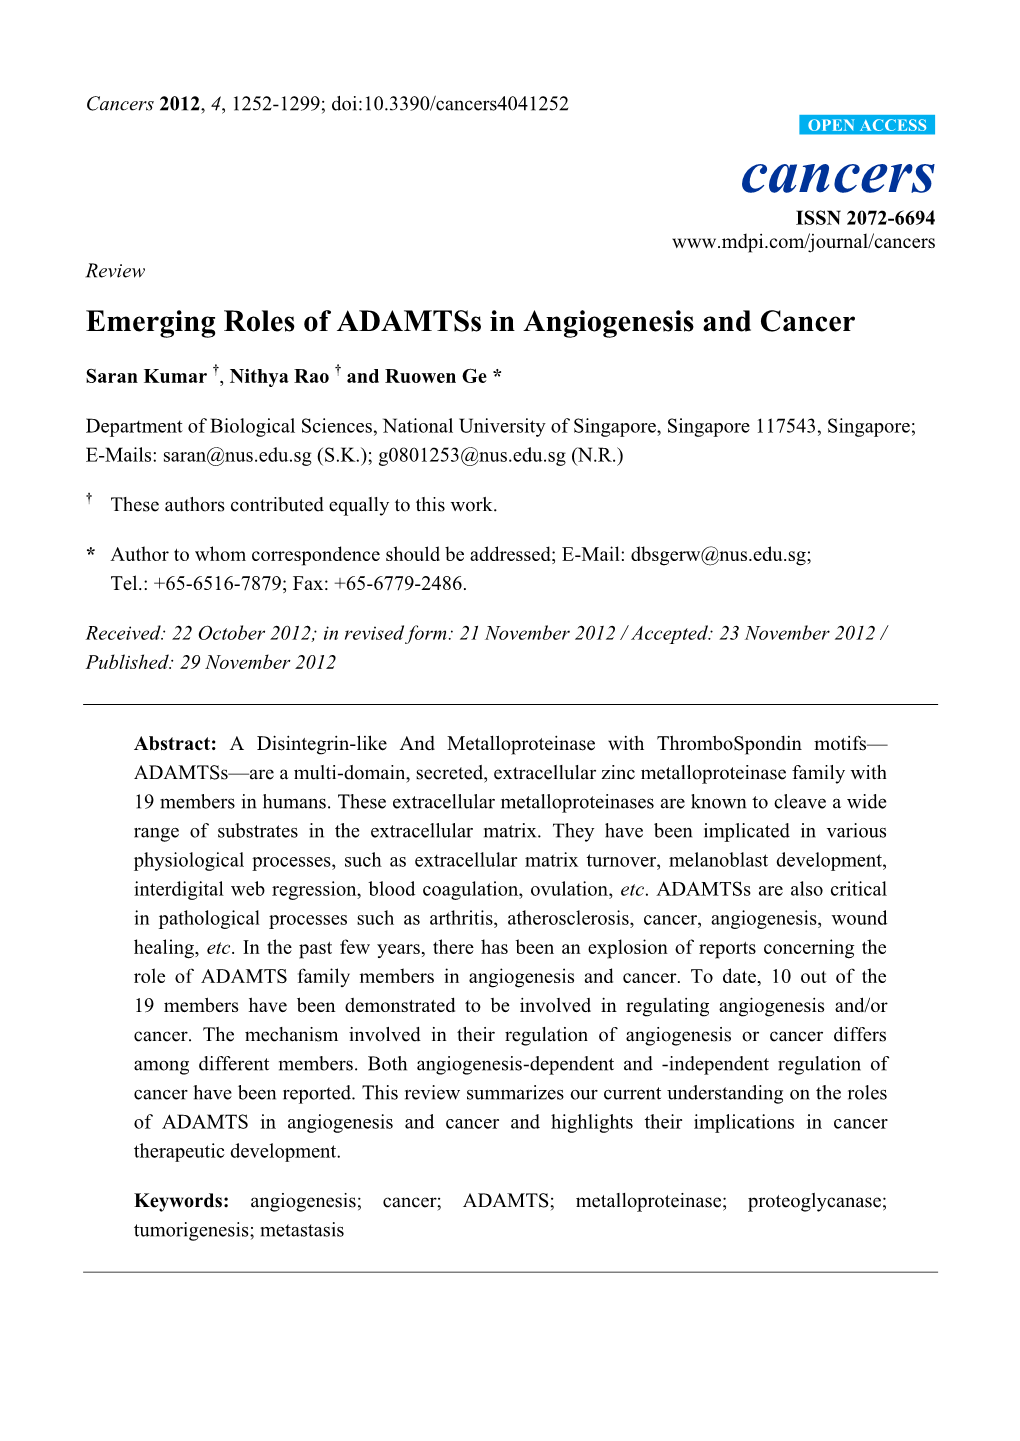 Emerging Roles of Adamtss in Angiogenesis and Cancer